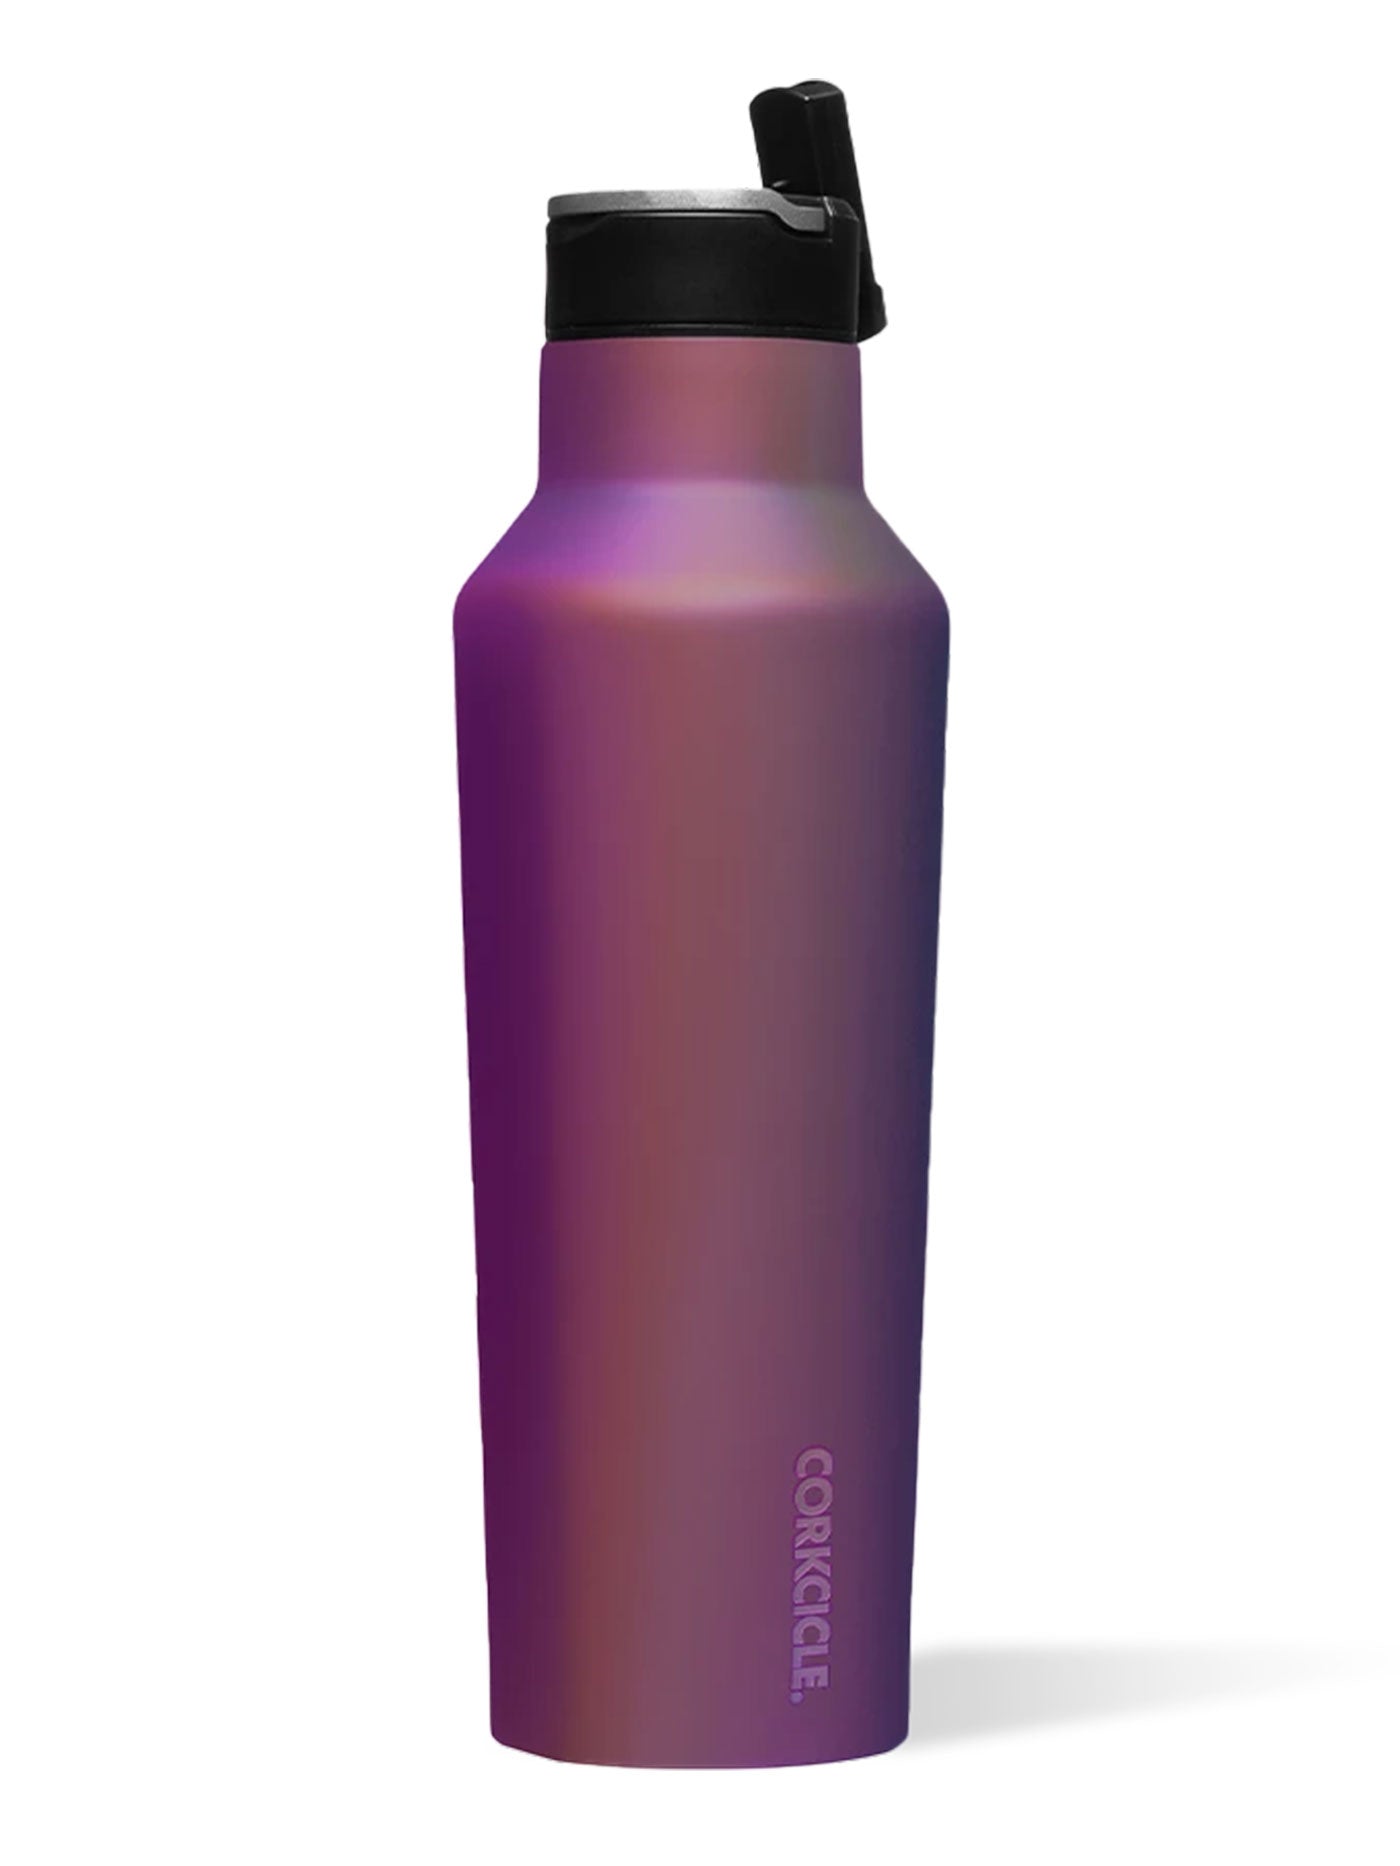 Corkcicle Dragonfly Sport 20oz Canteen